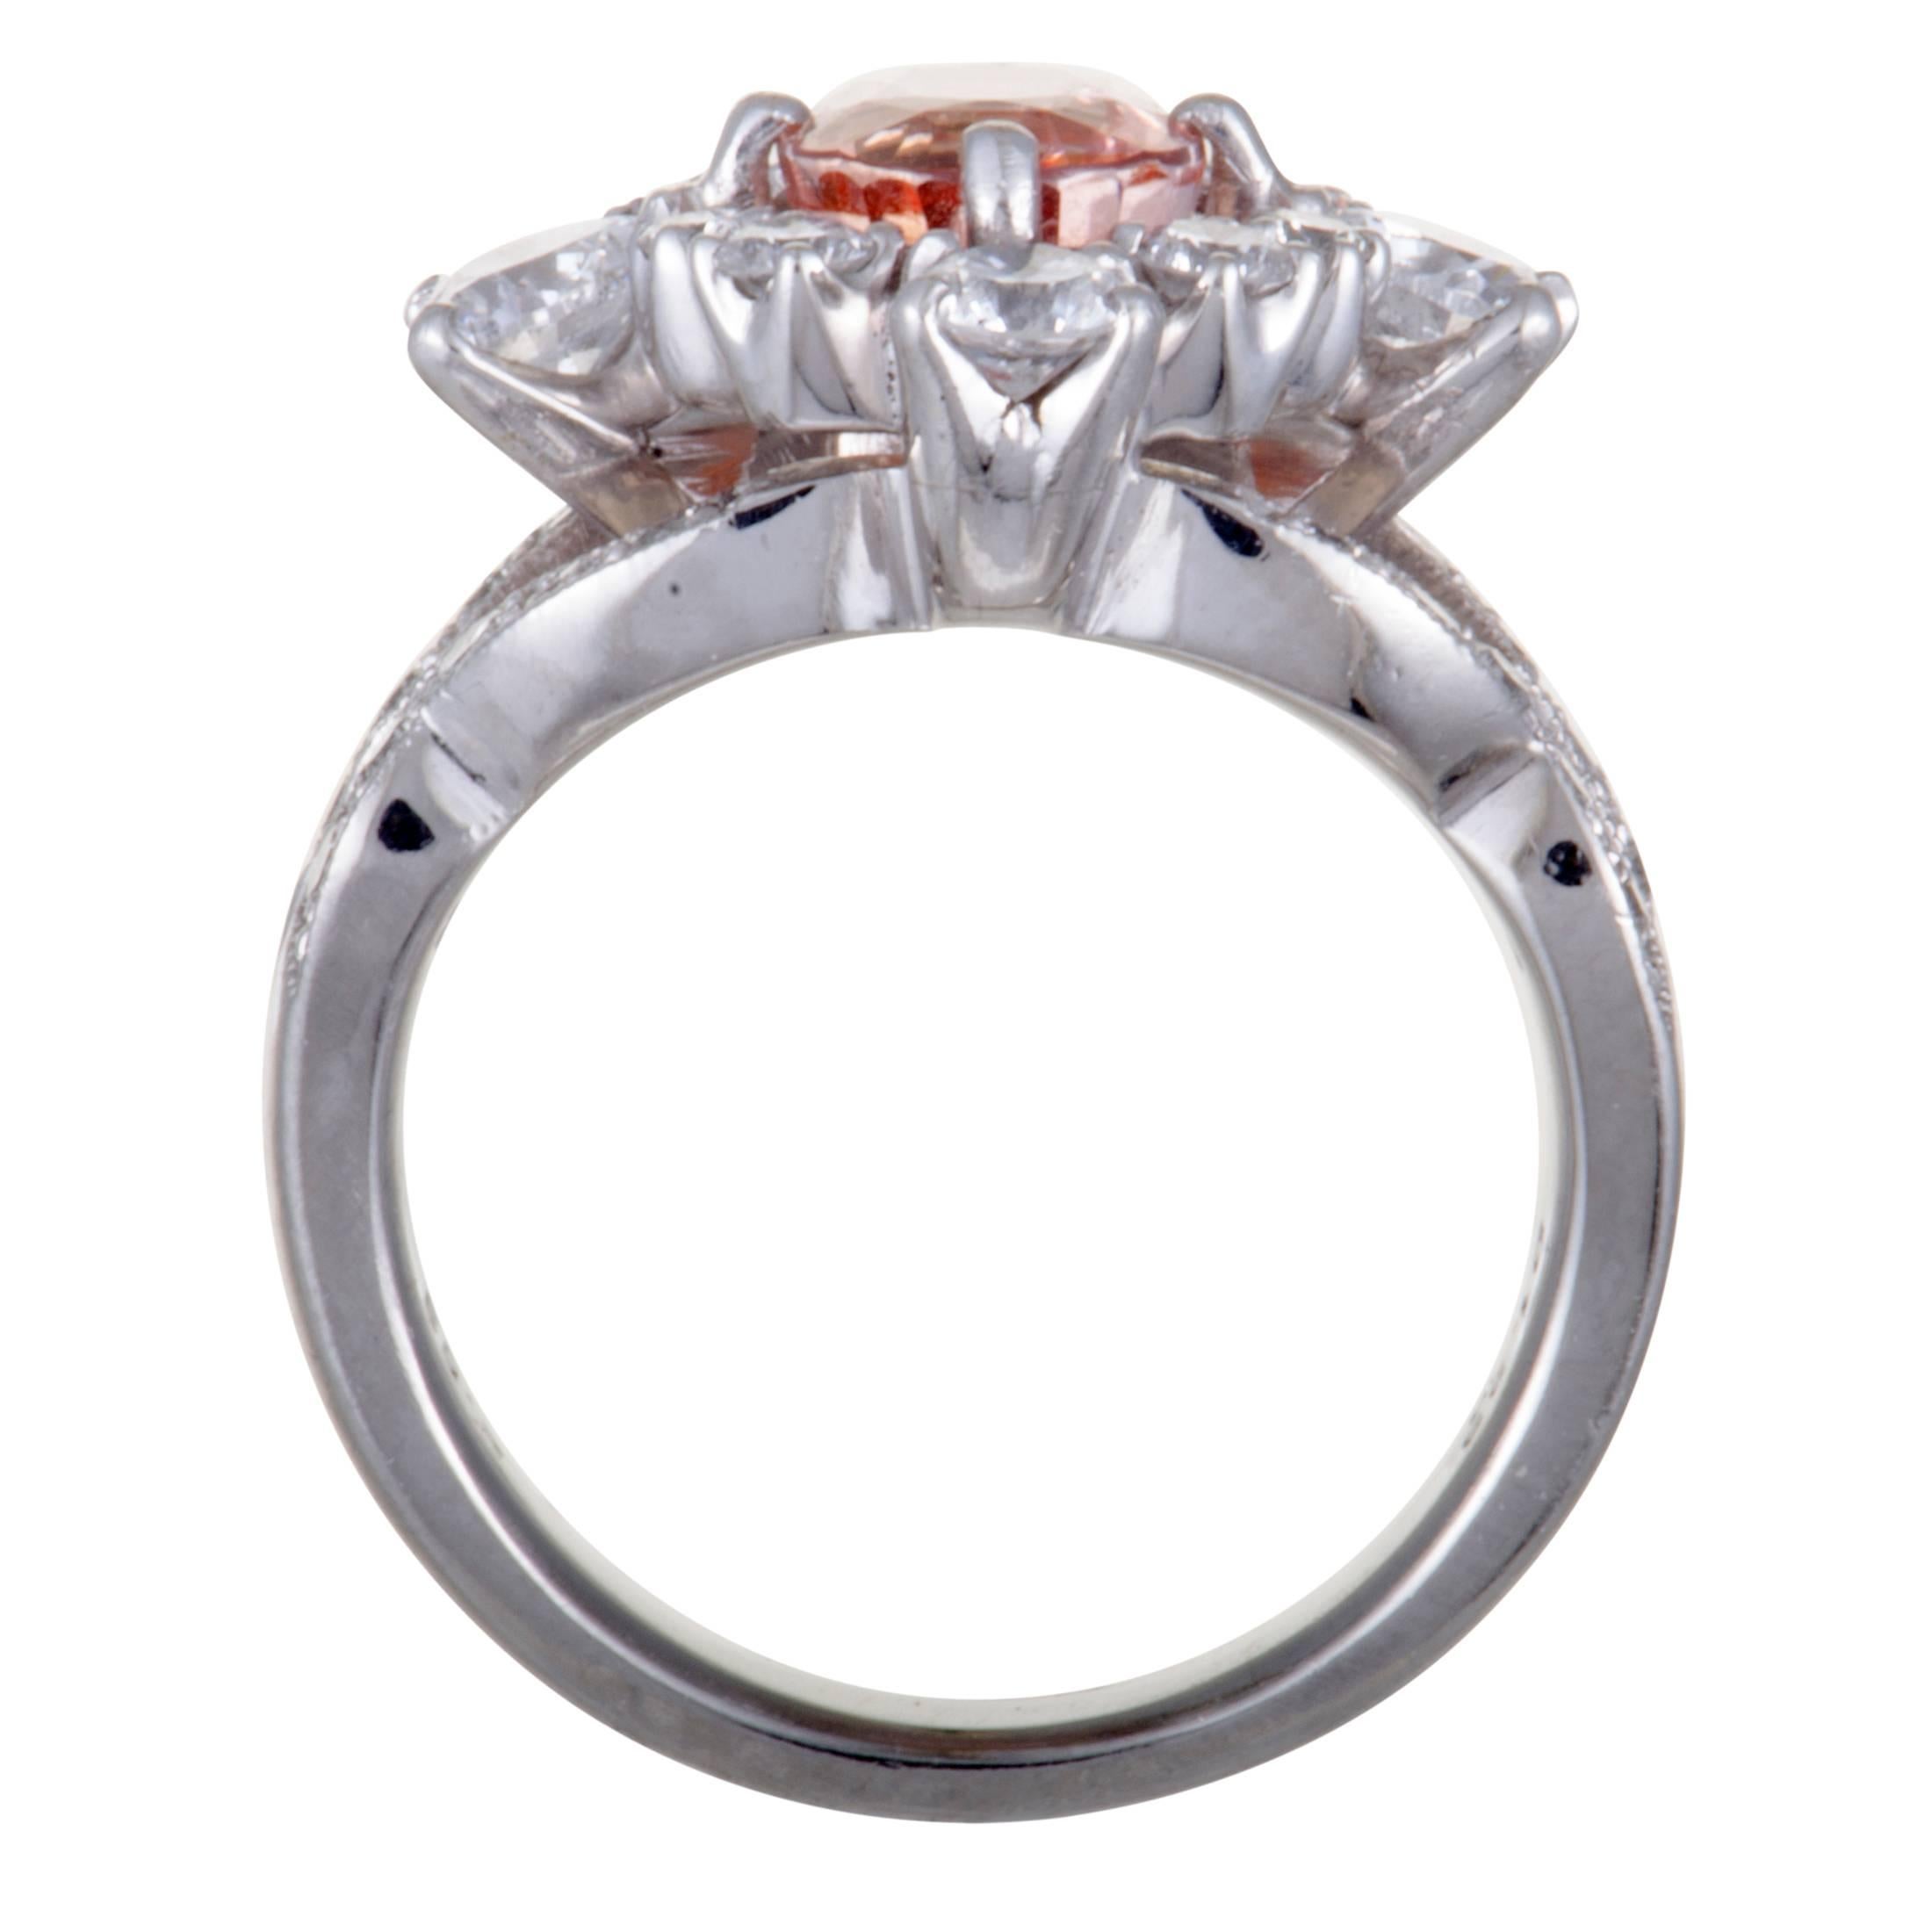 The expertly cut, eye-catching orange sapphire takes the central place in this extravagant ring that is beautifully made of luxurious platinum. The ring is also set with 1.33 carats of diamond stones, while the sapphire weighs 2.53 carats.
Ring